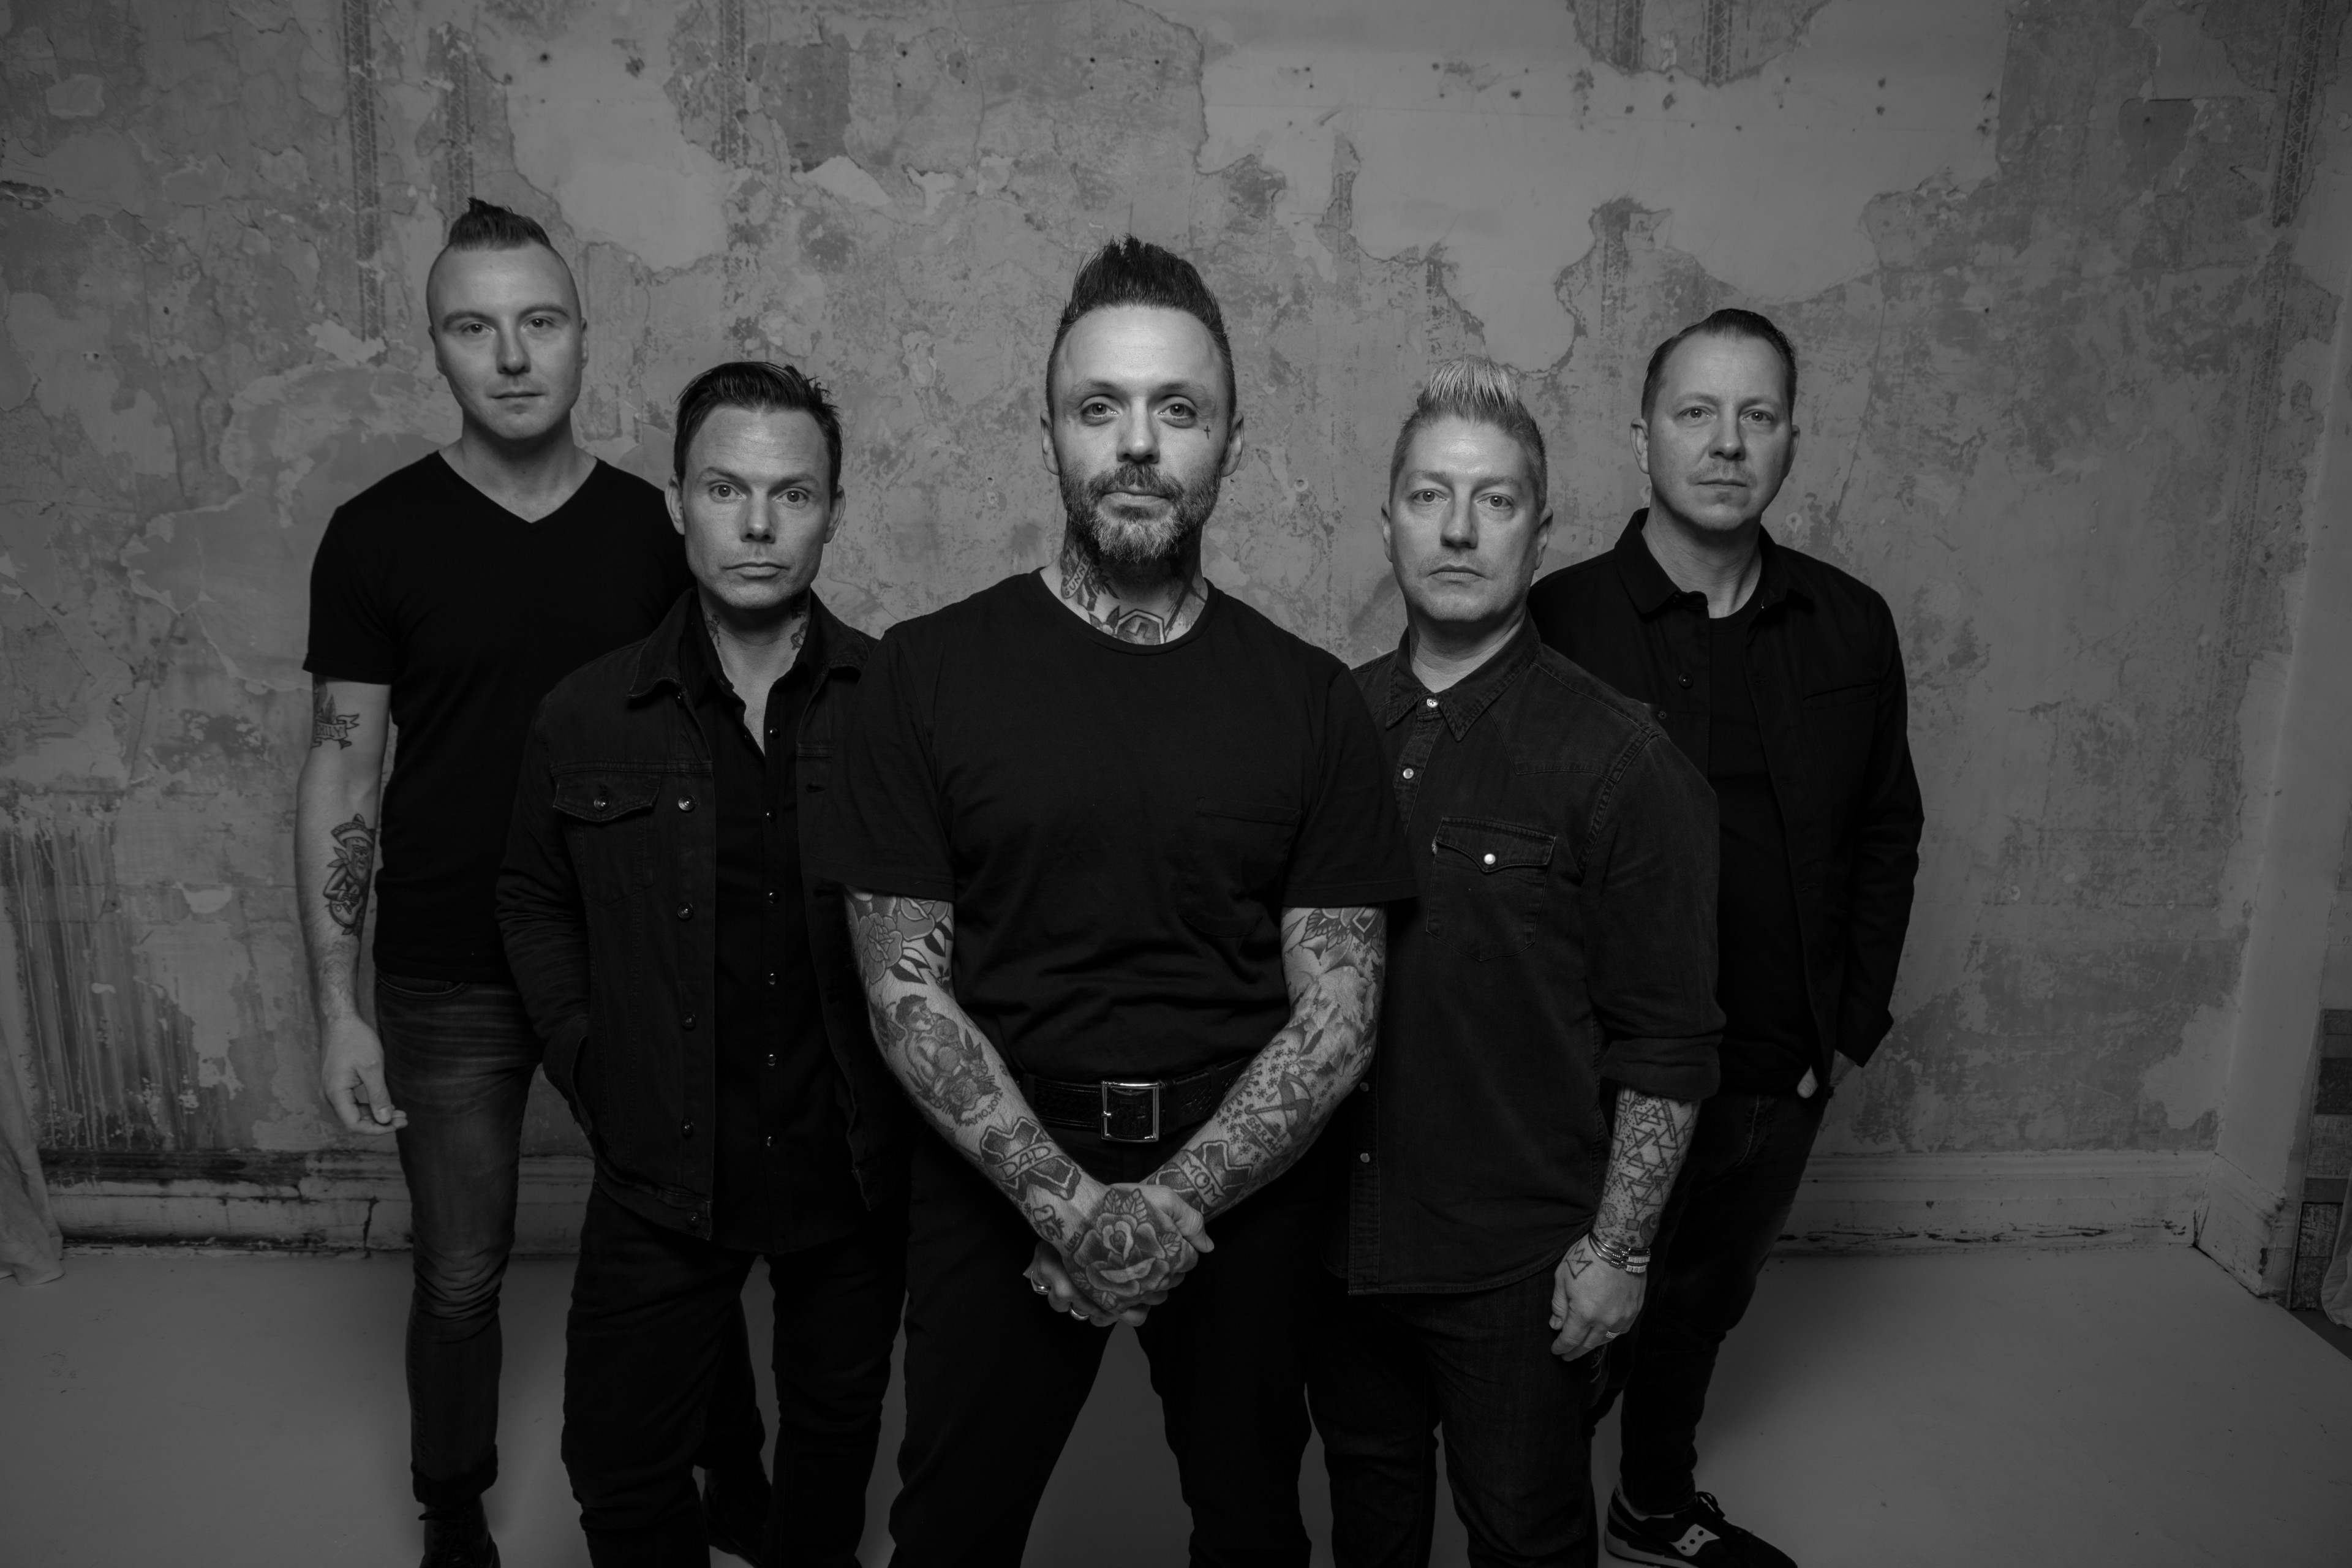 Blue October Discusses Capturing Immediacy and Emotion With ‘This Is What I Live For’